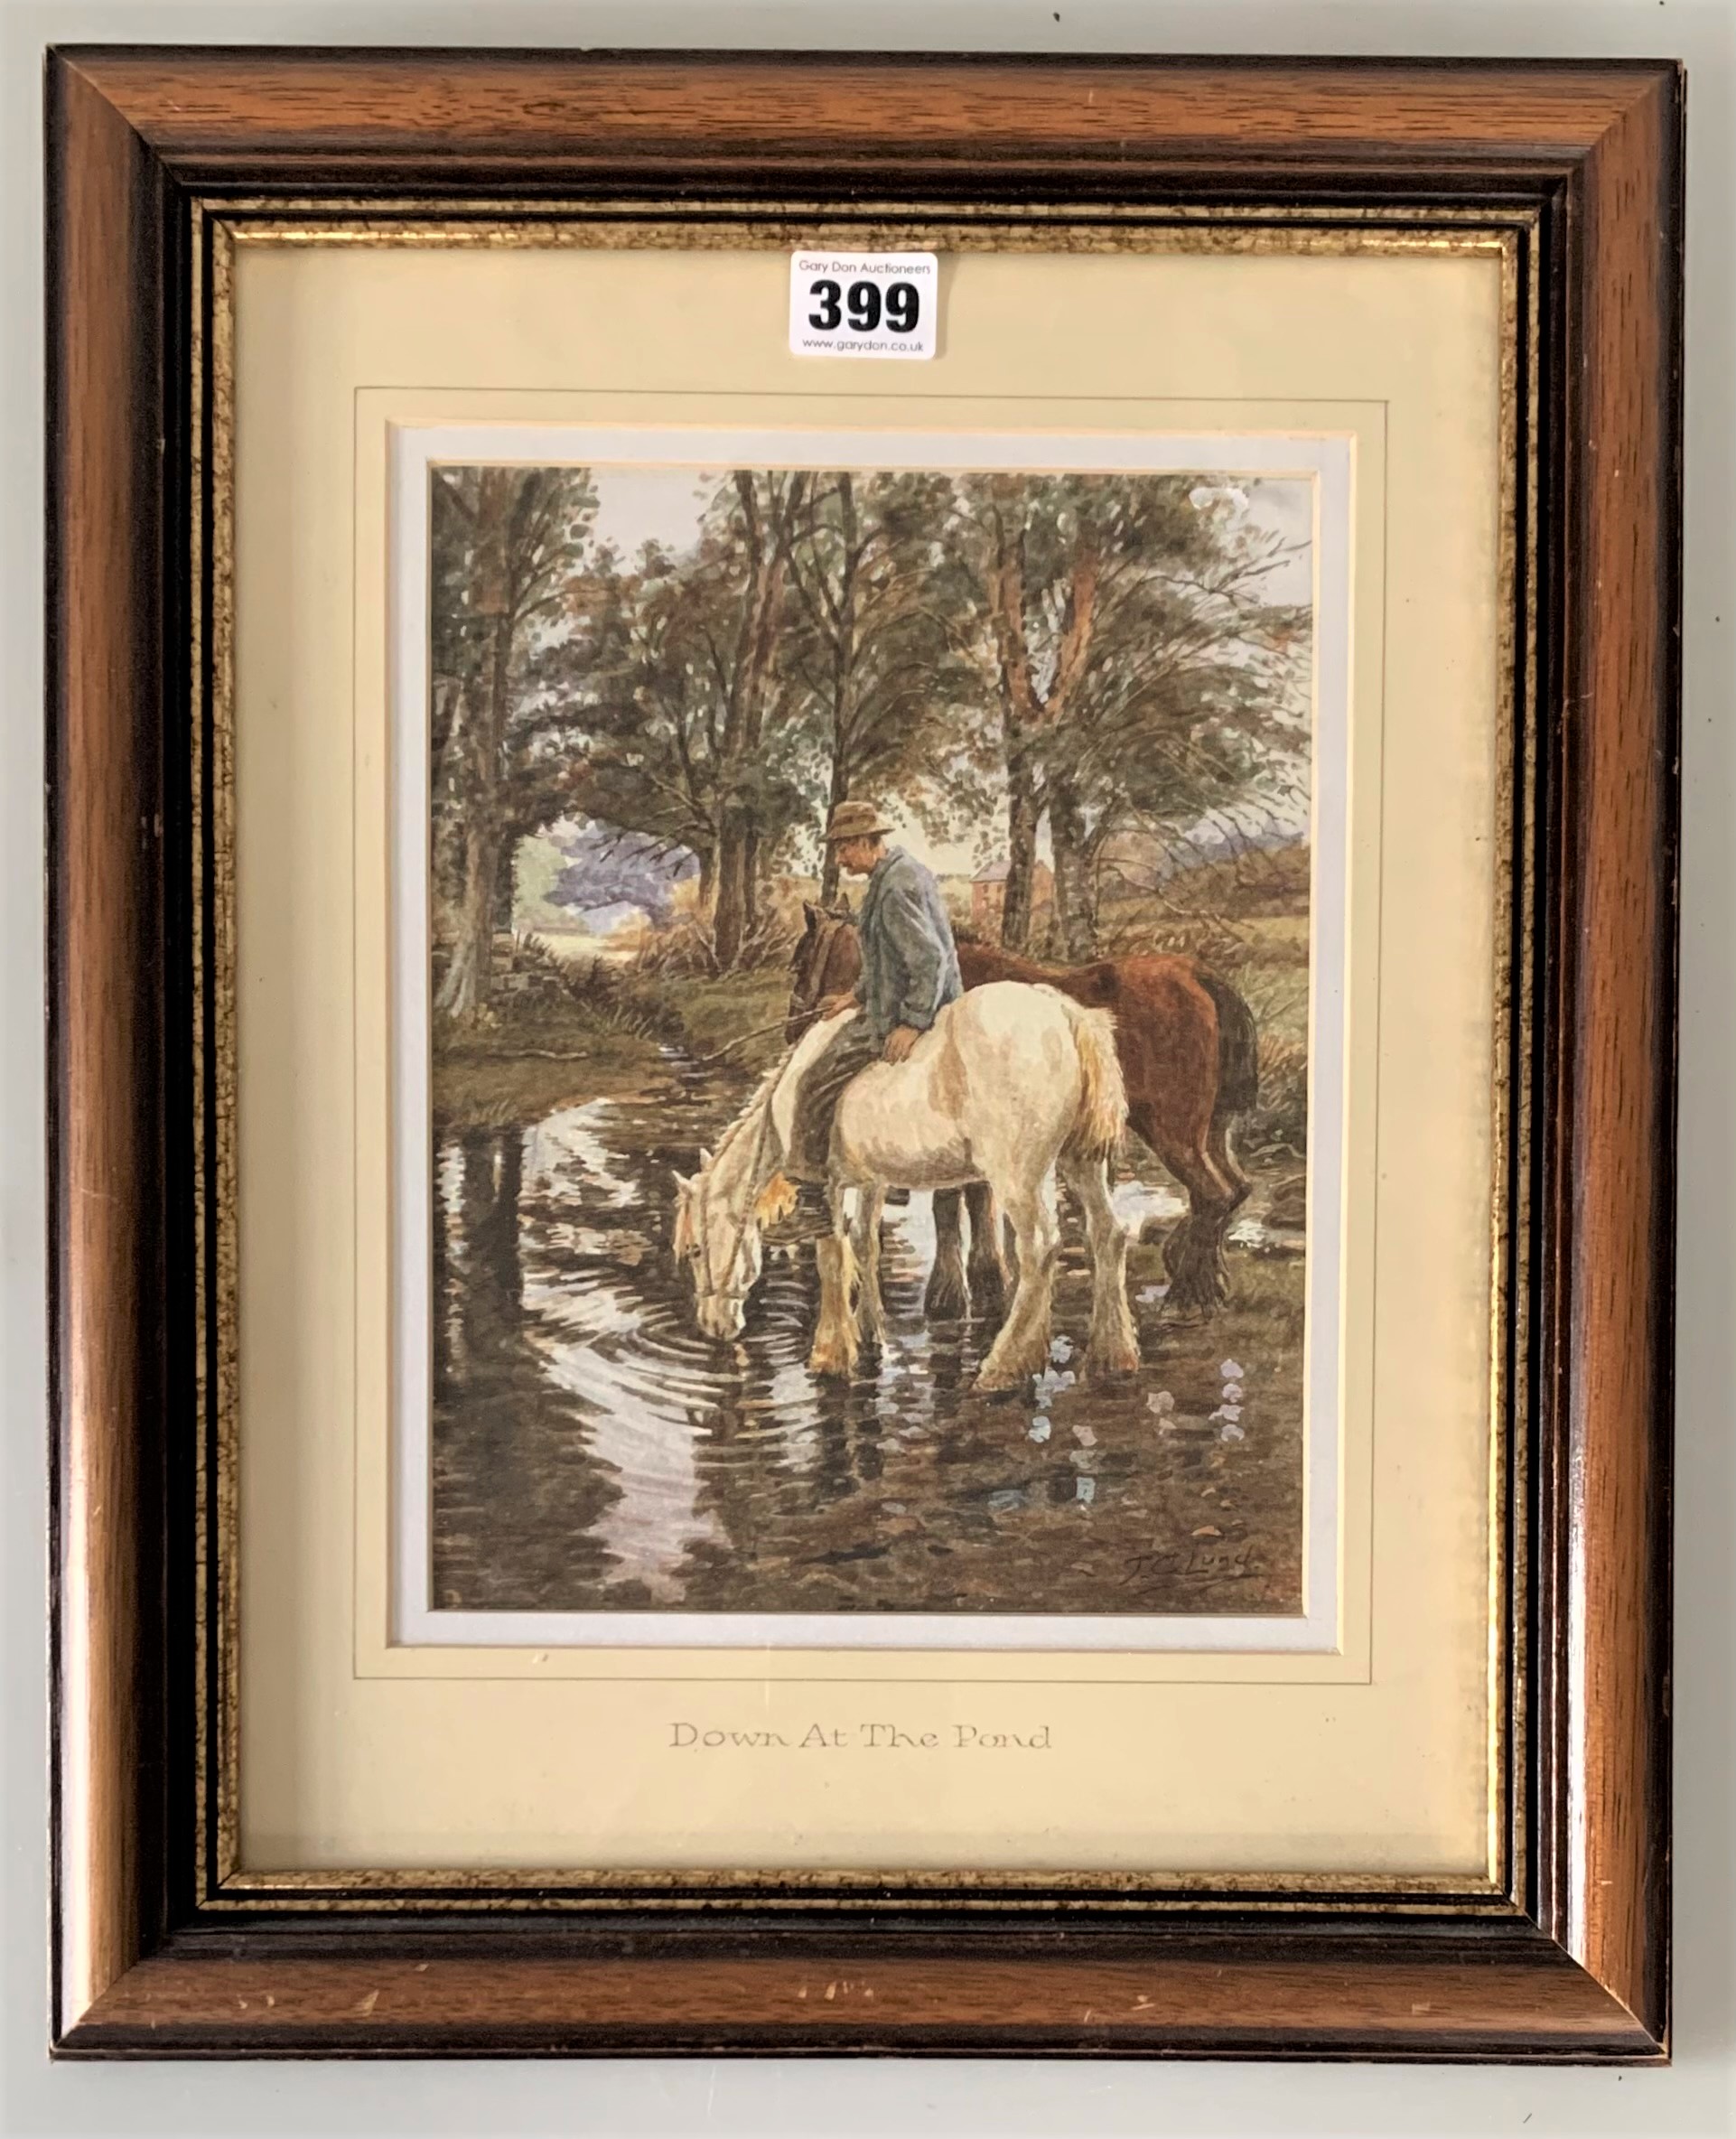 Watercolour ‘Down At The Pond’ signed by J. C. Lund. Image 7.5” x 9.5”, frame 14” x 17”